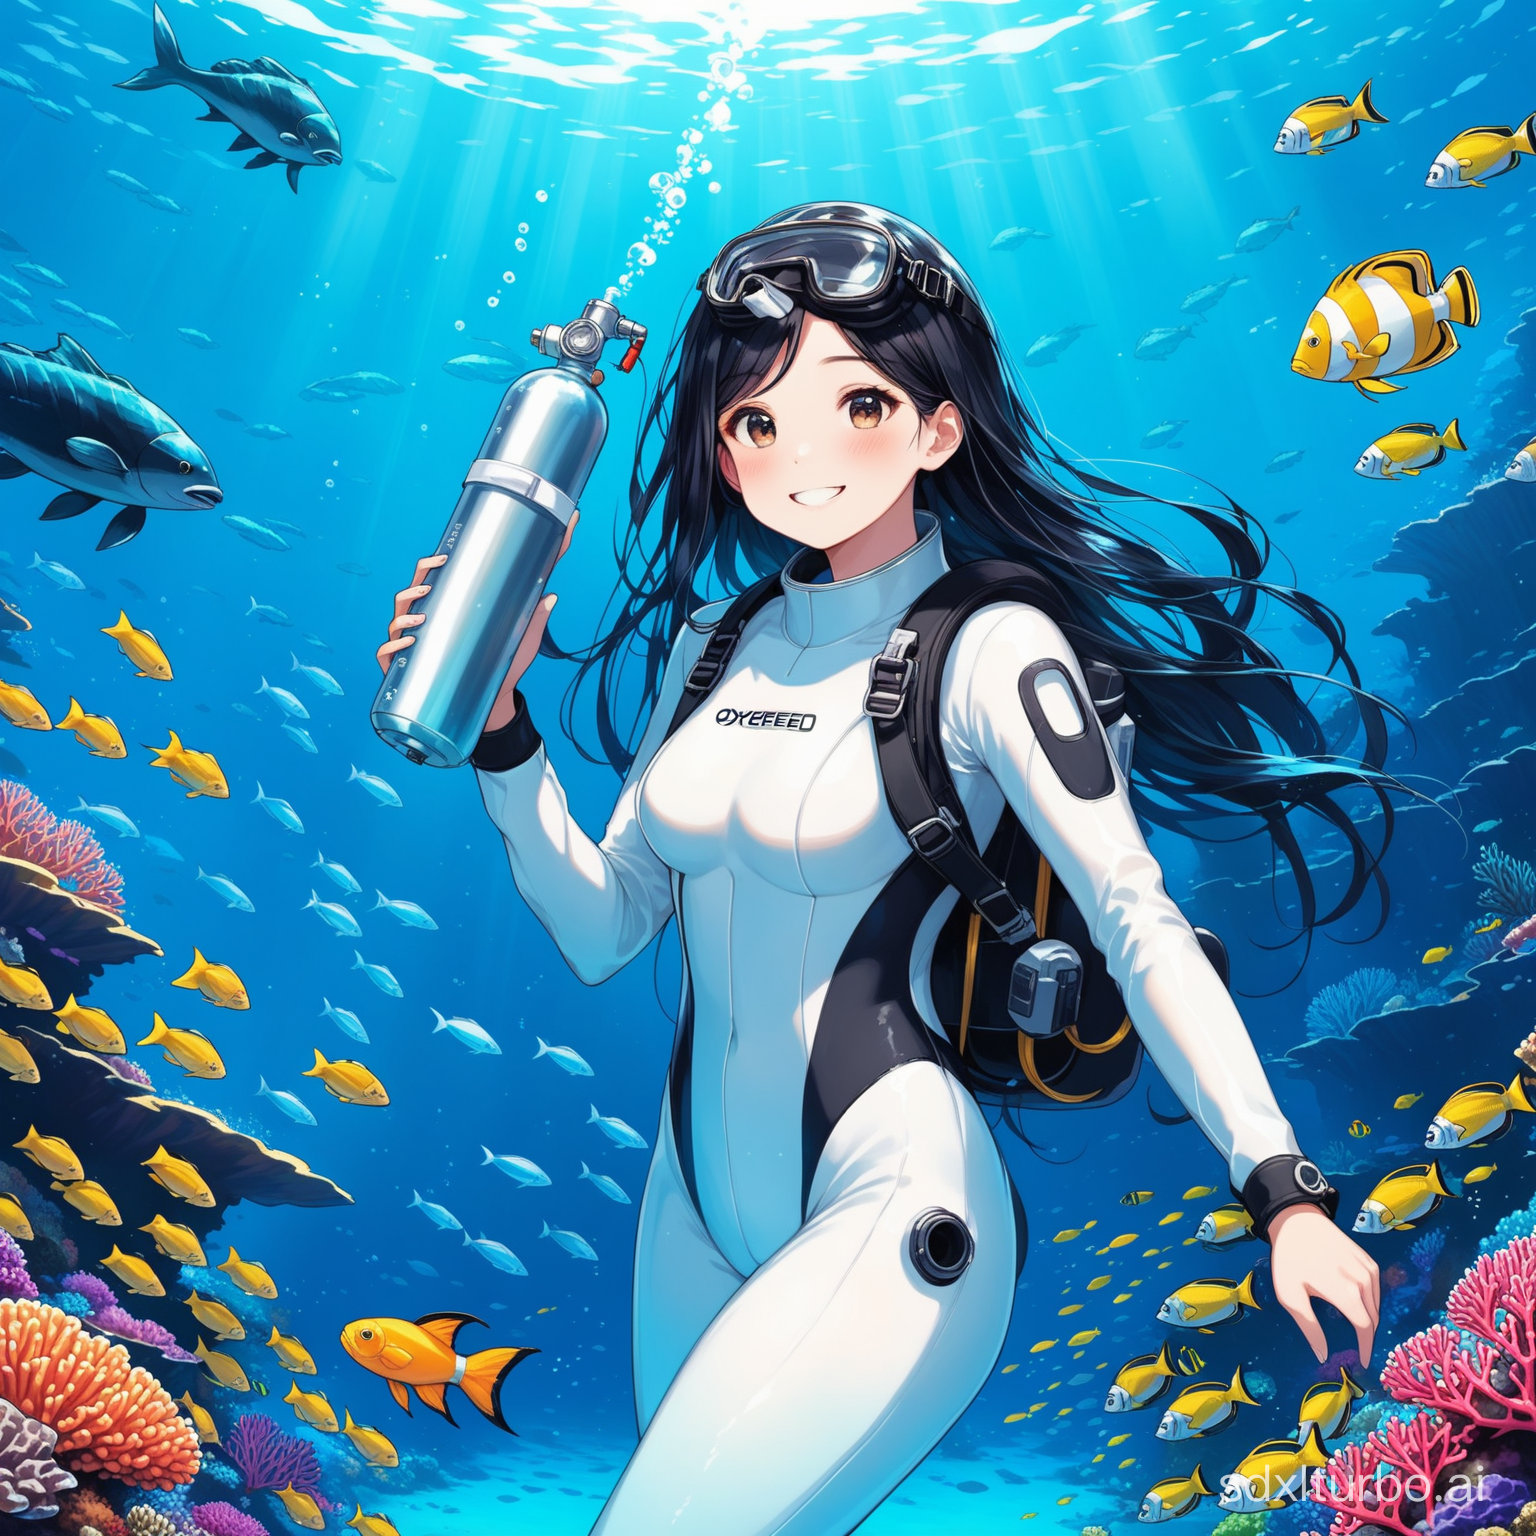 
In the deep sea, there is a girl with long black hair, beautiful, wearing a white diving suit, carrying an oxygen cylinder, wearing a smile on her face, colorful coral reefs, various fish, and seaweed,
